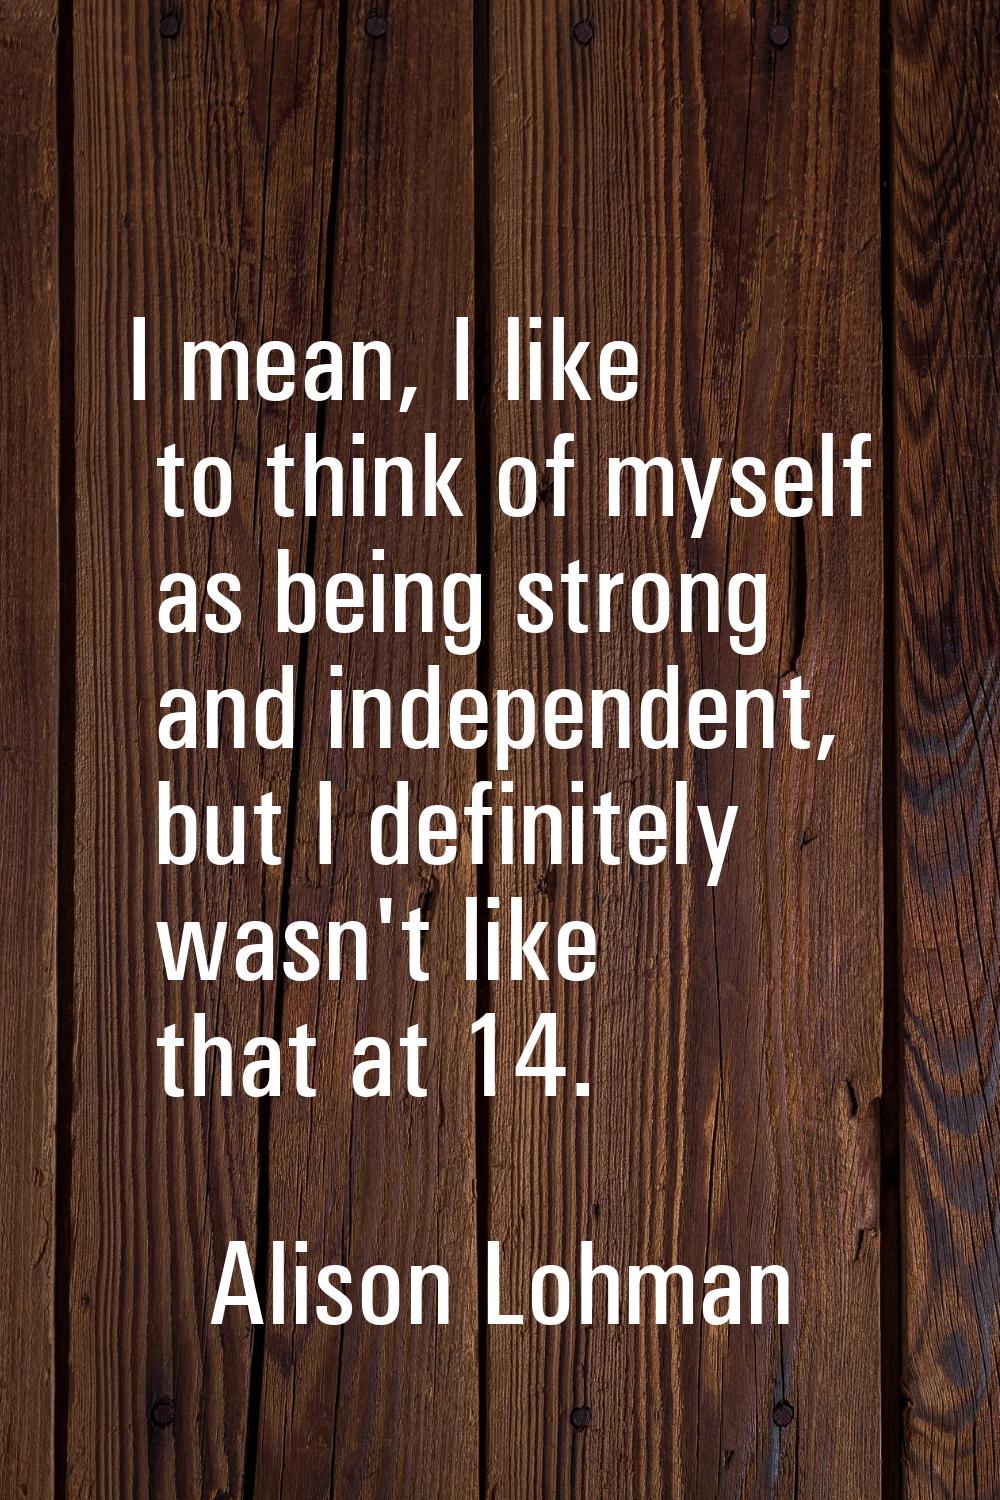 I mean, I like to think of myself as being strong and independent, but I definitely wasn't like tha